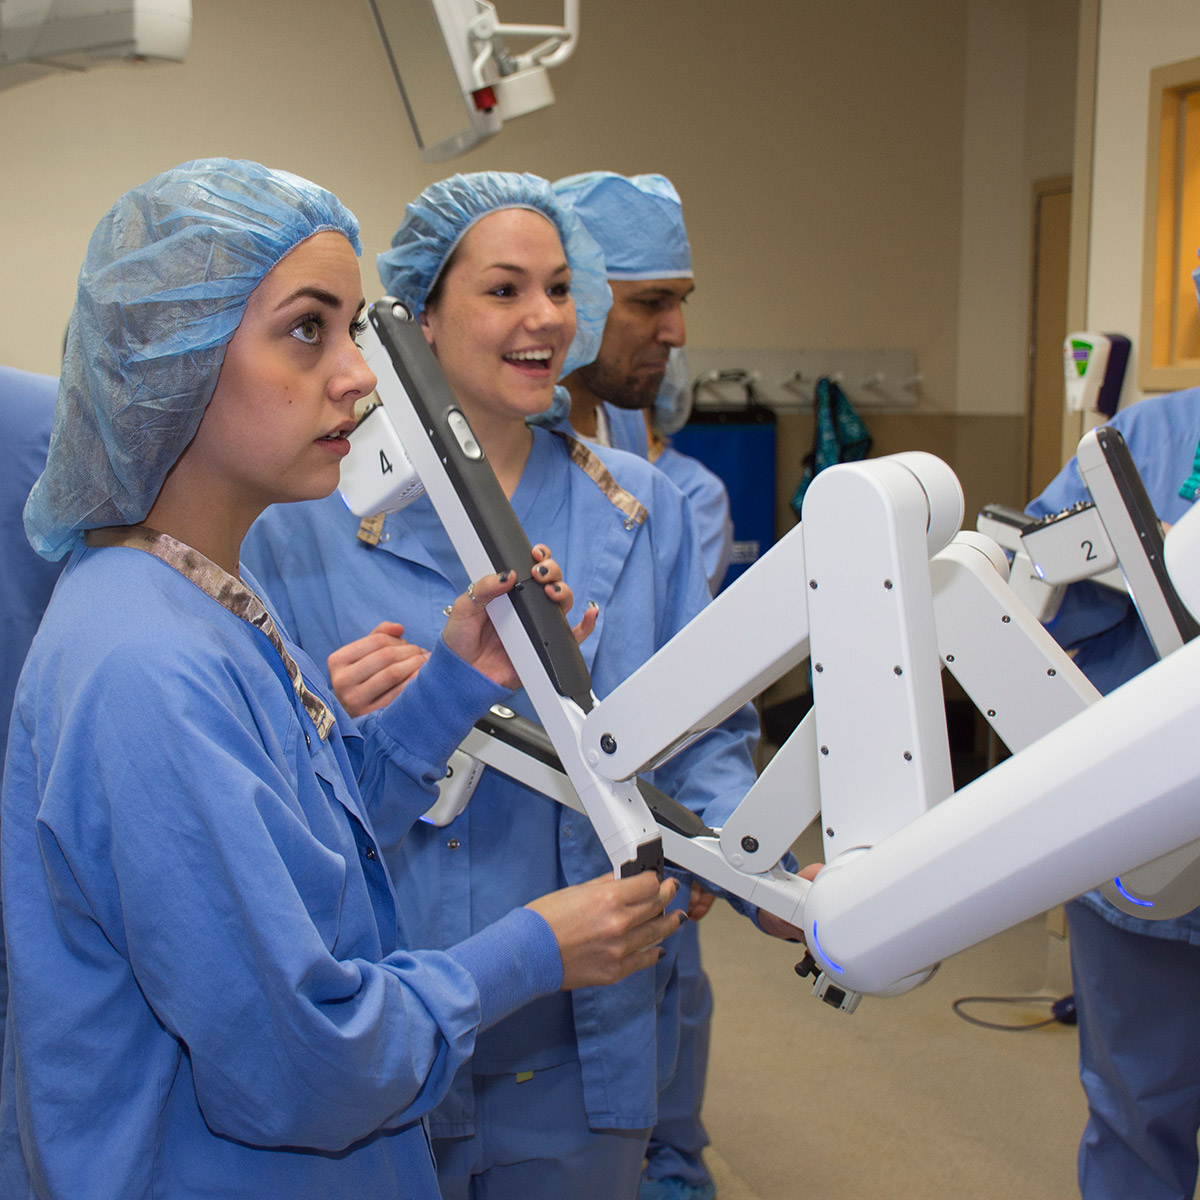 CCD Surgical Technology students working with medical equipment